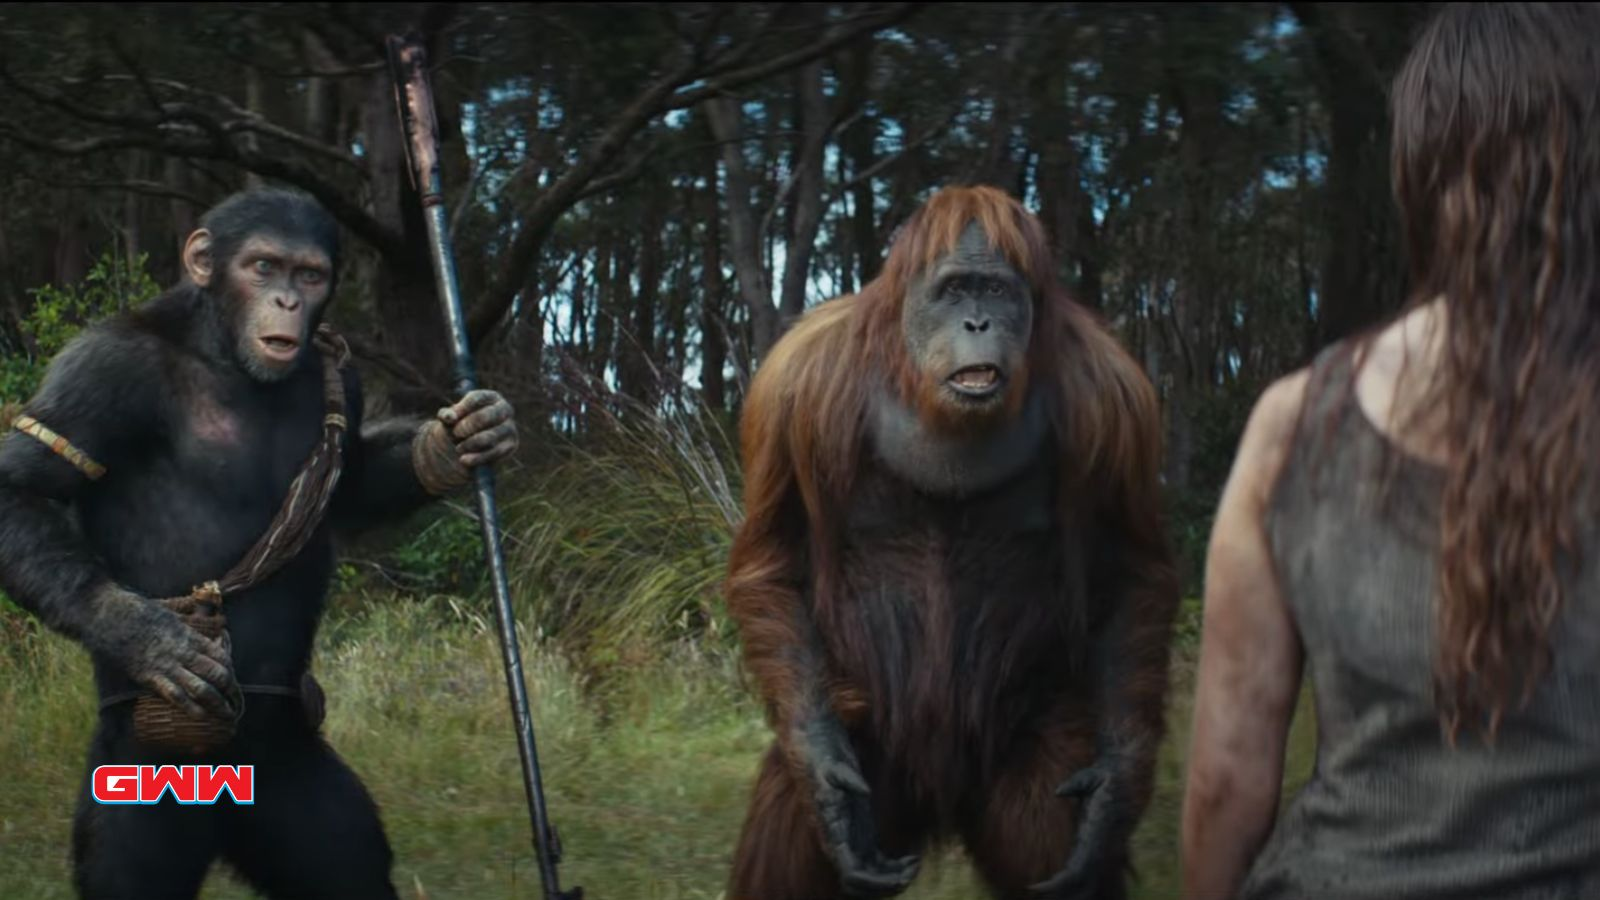 Scene of Noa and Raka talking to Mae in Kingdom of the Planet of the Apes trailer